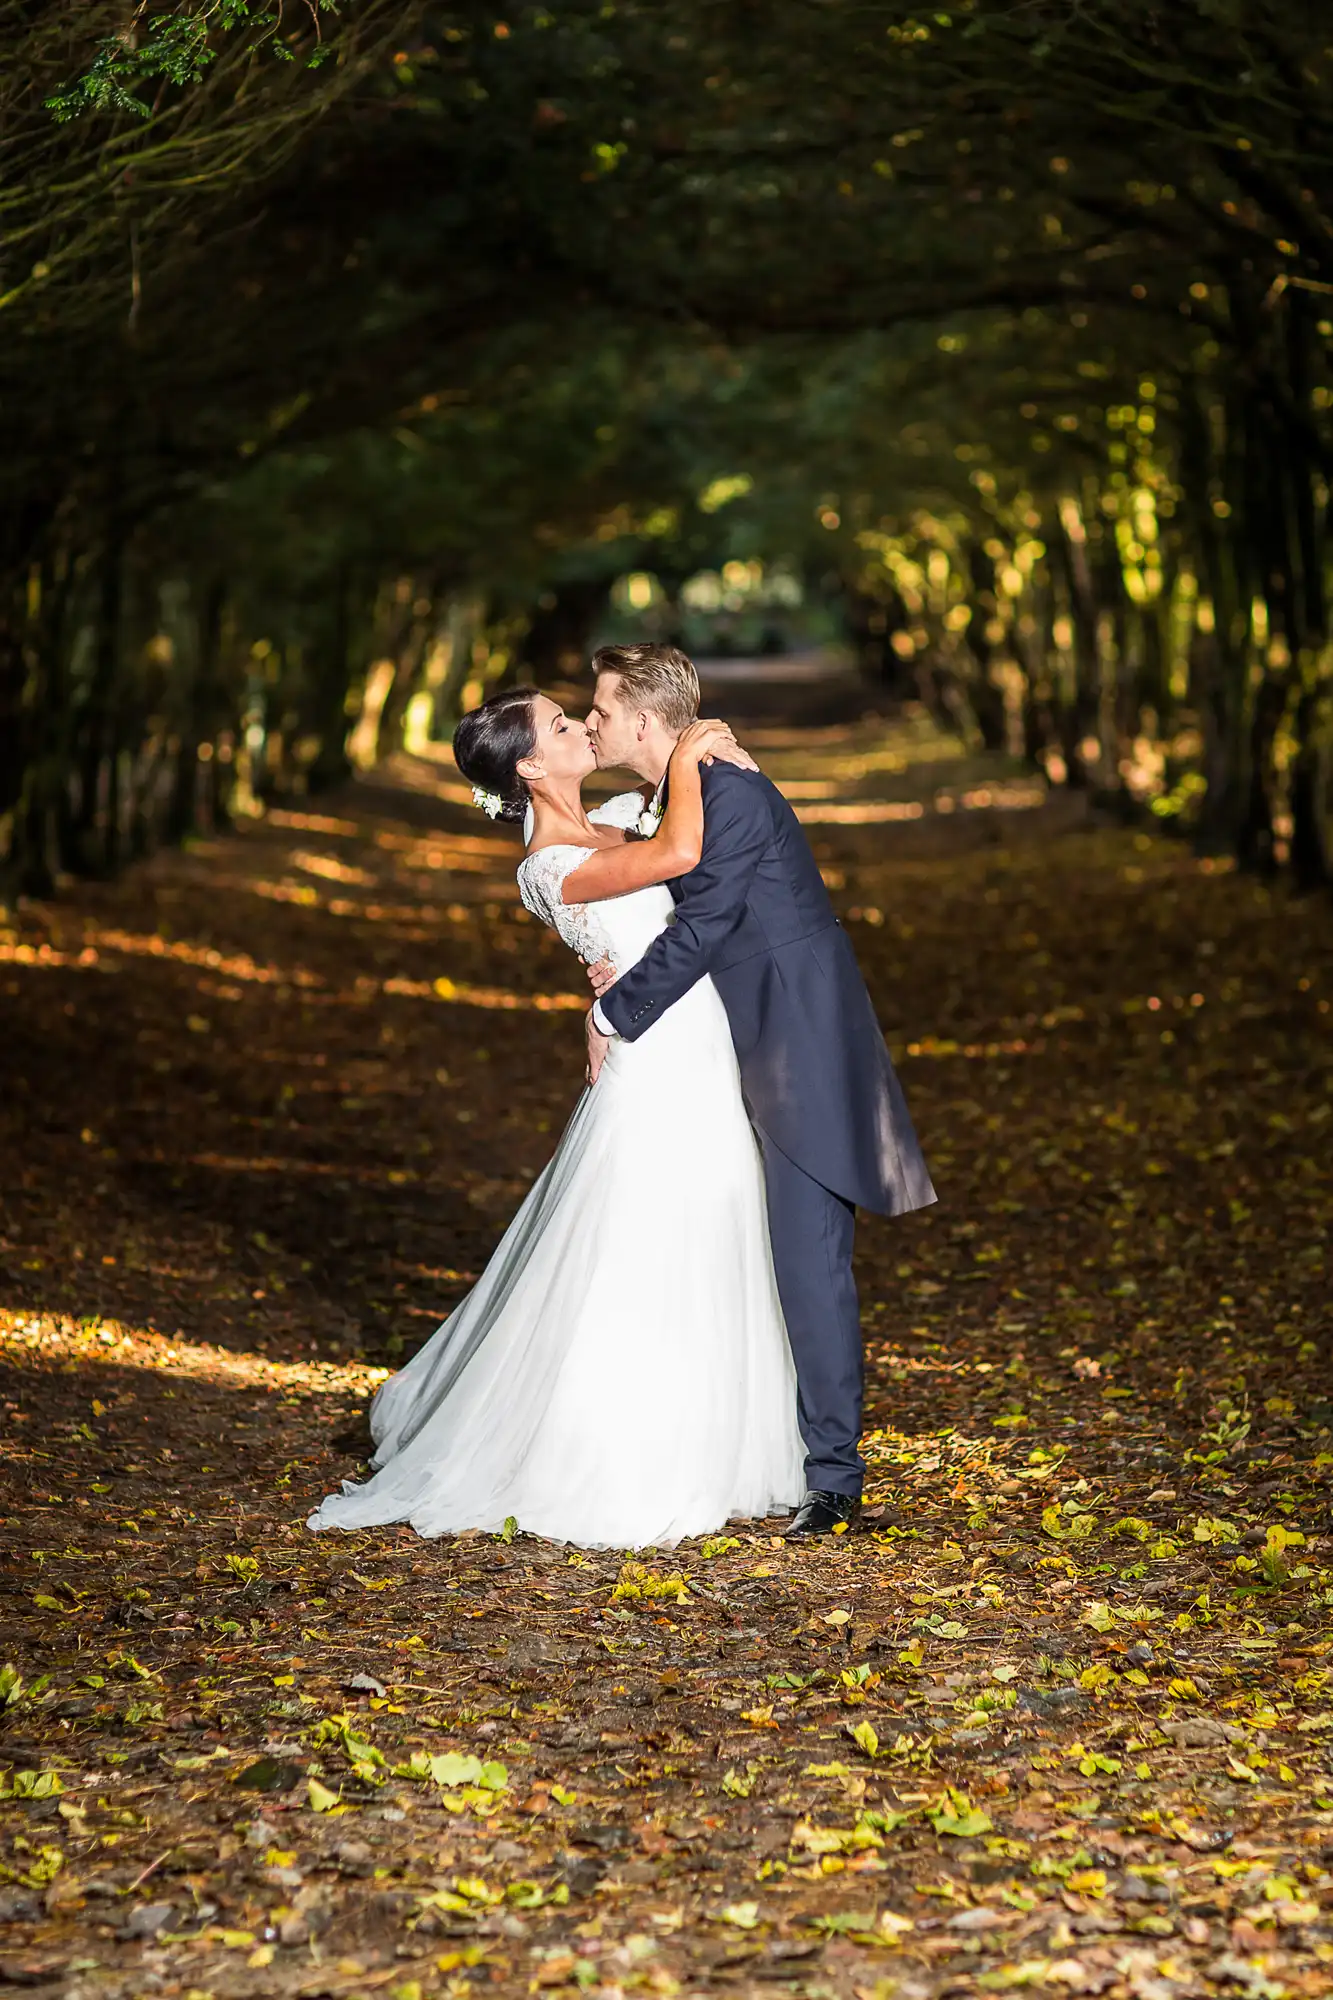 Bride in a white dress and groom in a black suit kissing under a canopy of trees with golden autumn leaves on the ground.